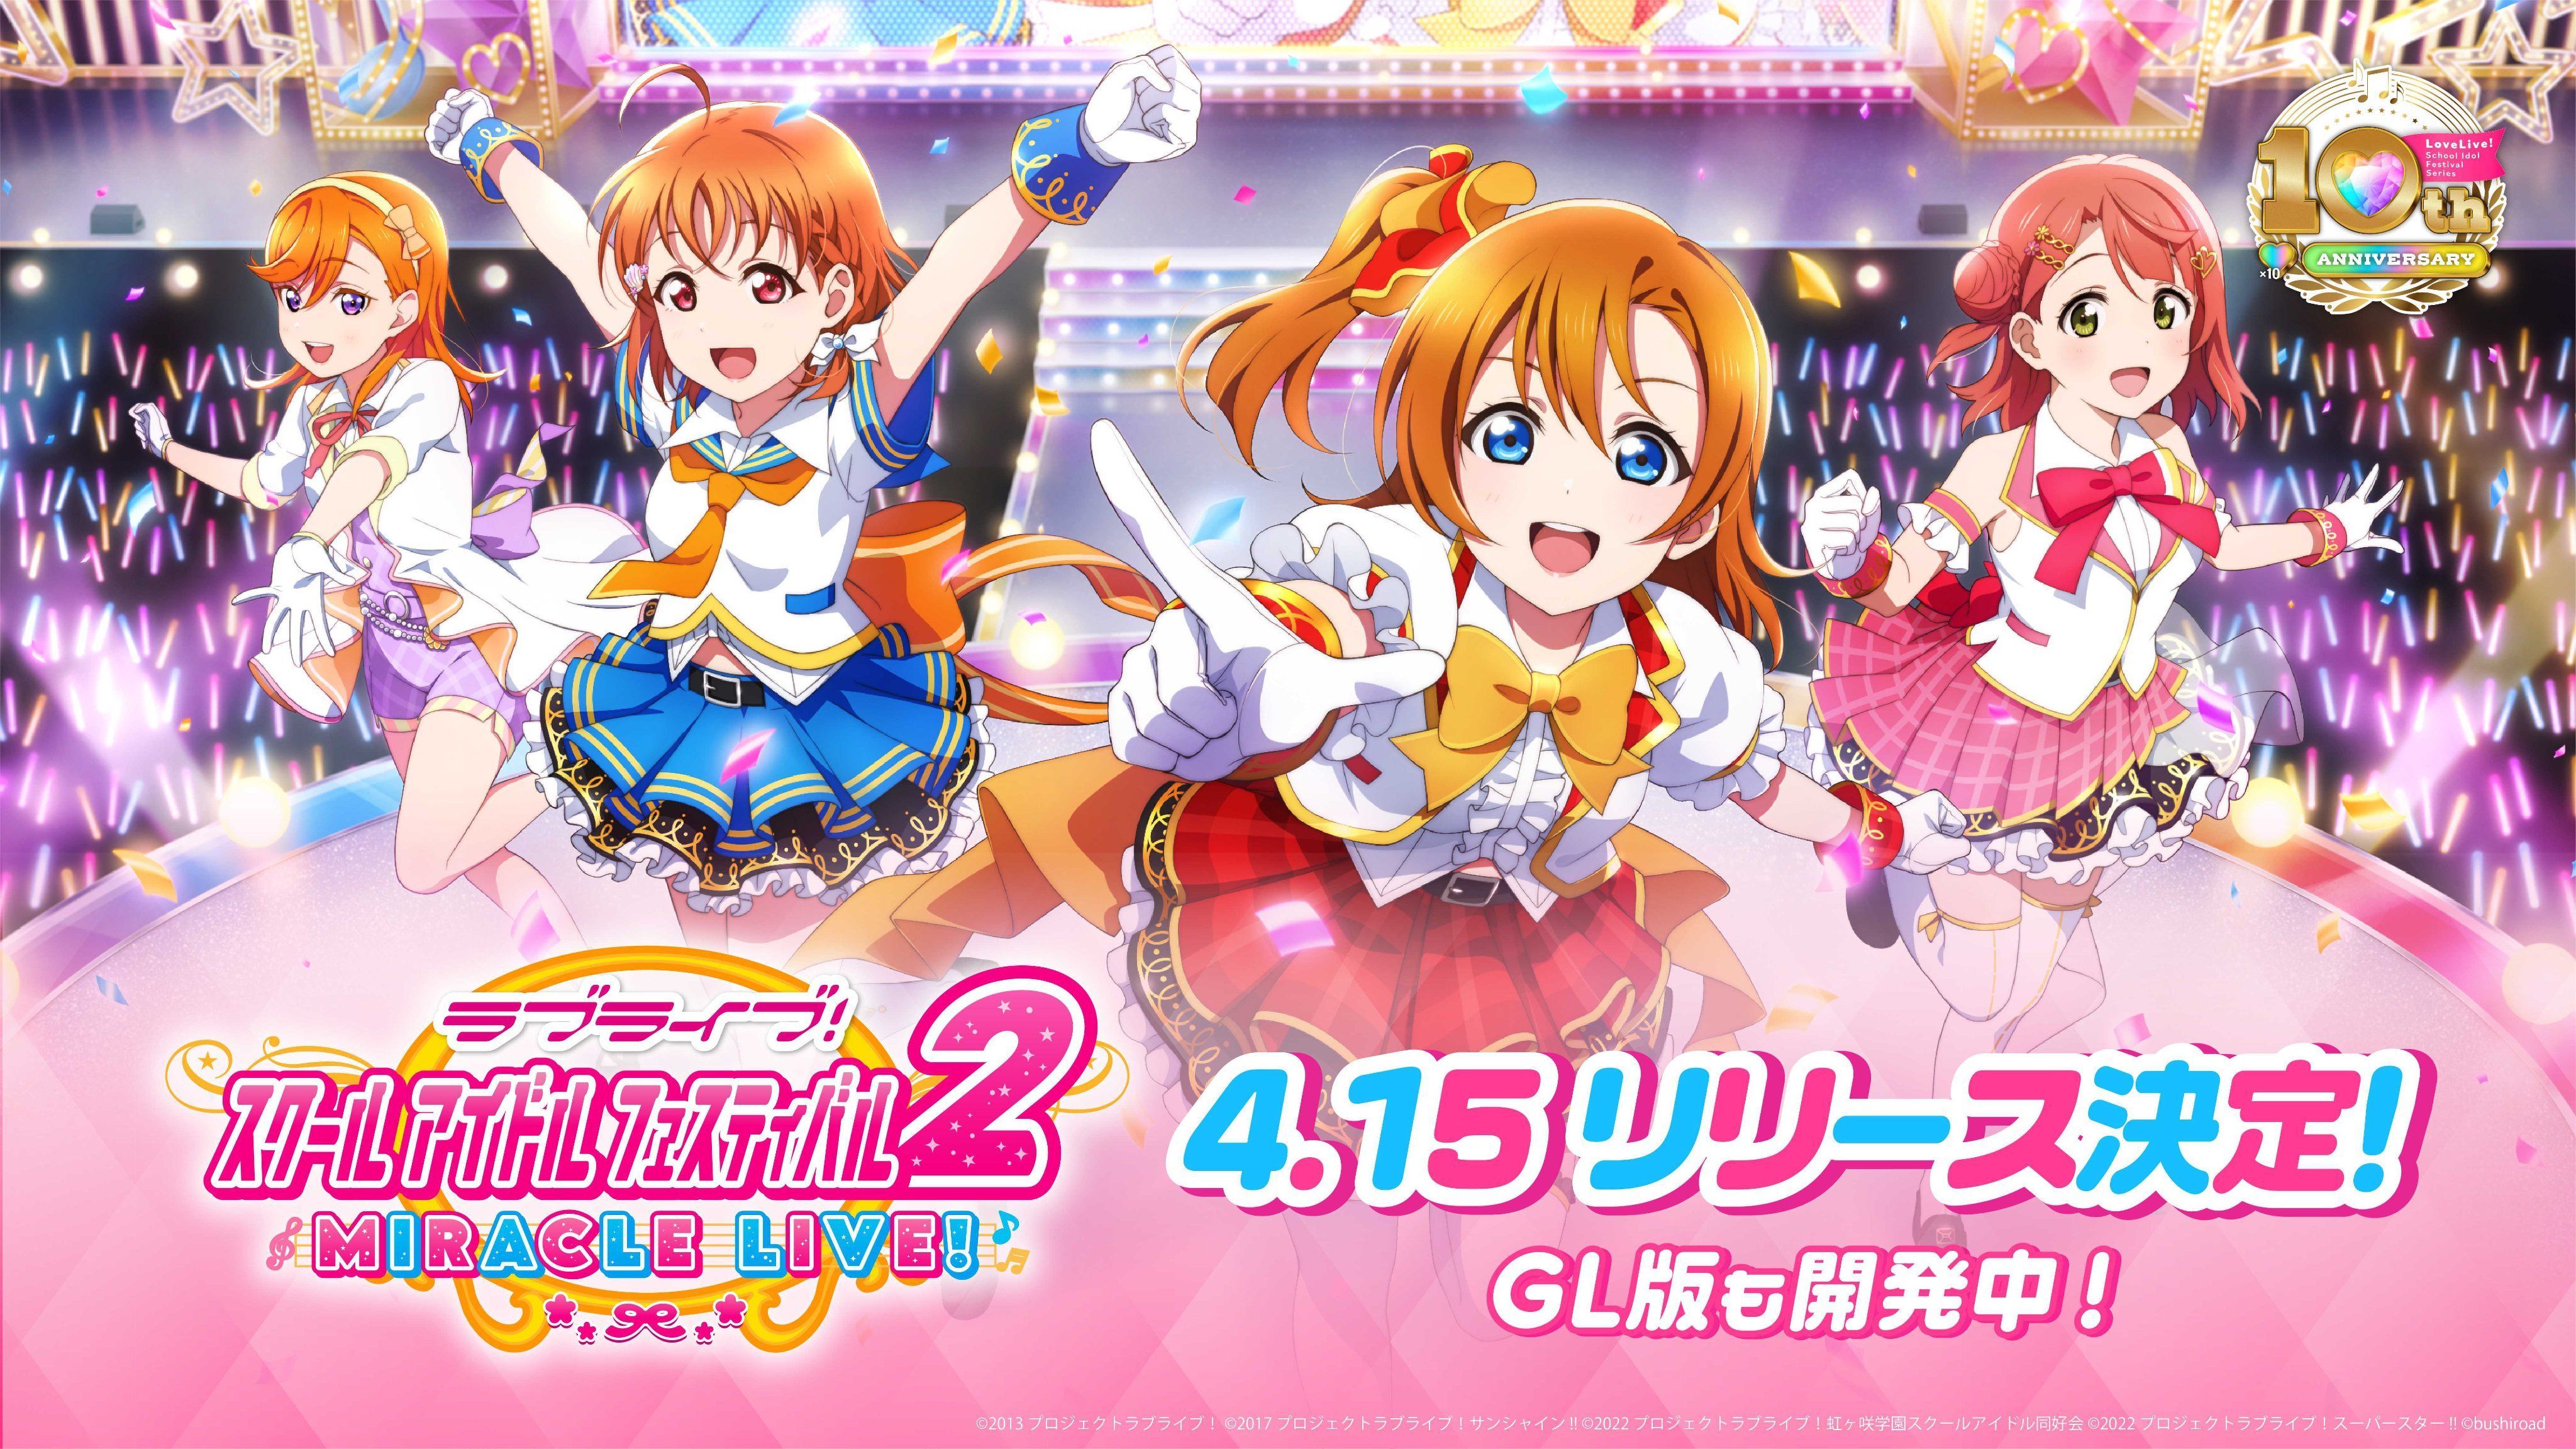 ▲▼《LoveLive! 學園偶像祭 2 MIRACLE LIVE!》。（圖／翻攝自@lovelive_SIF）